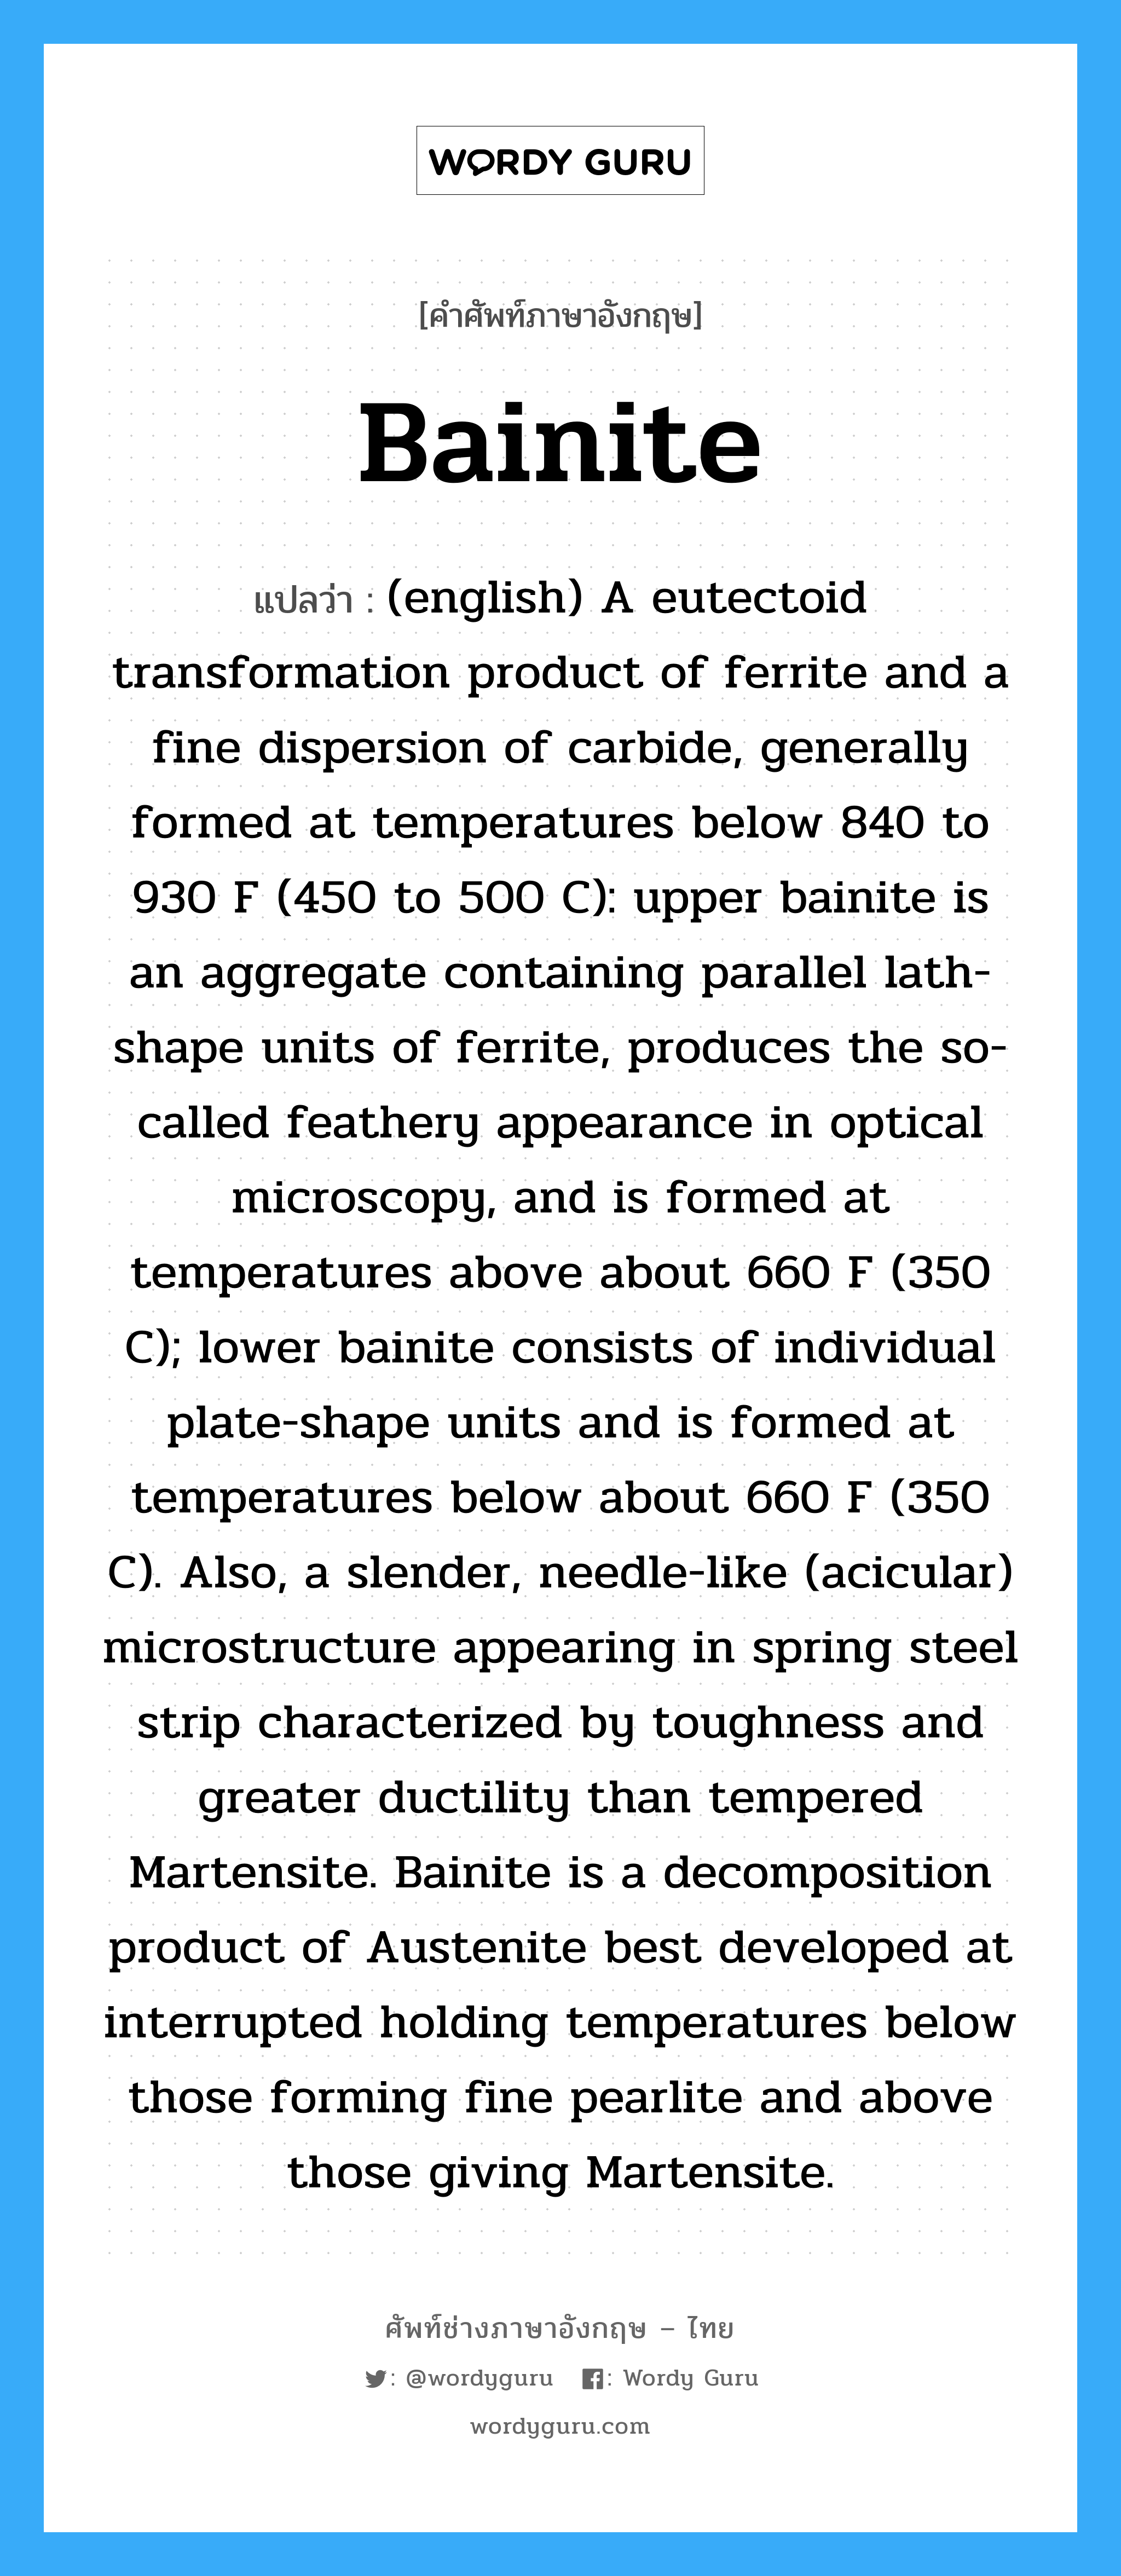 (english) A eutectoid transformation product of ferrite and a fine dispersion of carbide, generally formed at temperatures below 840 to 930 F (450 to 500 C): upper bainite is an aggregate containing parallel lath-shape units of ferrite, produces the so-called feathery appearance in optical microscopy, and is formed at temperatures above about 660 F (350 C); lower bainite consists of individual plate-shape units and is formed at temperatures below about 660 F (350 C). Also, a slender, needle-like (acicular) microstructure appearing in spring steel strip characterized by toughness and greater ductility than tempered Martensite. Bainite is a decomposition product of Austenite best developed at interrupted holding temperatures below those forming fine pearlite and above those giving Martensite. ภาษาอังกฤษ?, คำศัพท์ช่างภาษาอังกฤษ - ไทย (english) A eutectoid transformation product of ferrite and a fine dispersion of carbide, generally formed at temperatures below 840 to 930 F (450 to 500 C): upper bainite is an aggregate containing parallel lath-shape units of ferrite, produces the so-called feathery appearance in optical microscopy, and is formed at temperatures above about 660 F (350 C); lower bainite consists of individual plate-shape units and is formed at temperatures below about 660 F (350 C). Also, a slender, needle-like (acicular) microstructure appearing in spring steel strip characterized by toughness and greater ductility than tempered Martensite. Bainite is a decomposition product of Austenite best developed at interrupted holding temperatures below those forming fine pearlite and above those giving Martensite. คำศัพท์ภาษาอังกฤษ (english) A eutectoid transformation product of ferrite and a fine dispersion of carbide, generally formed at temperatures below 840 to 930 F (450 to 500 C): upper bainite is an aggregate containing parallel lath-shape units of ferrite, produces the so-called feathery appearance in optical microscopy, and is formed at temperatures above about 660 F (350 C); lower bainite consists of individual plate-shape units and is formed at temperatures below about 660 F (350 C). Also, a slender, needle-like (acicular) microstructure appearing in spring steel strip characterized by toughness and greater ductility than tempered Martensite. Bainite is a decomposition product of Austenite best developed at interrupted holding temperatures below those forming fine pearlite and above those giving Martensite. แปลว่า Bainite